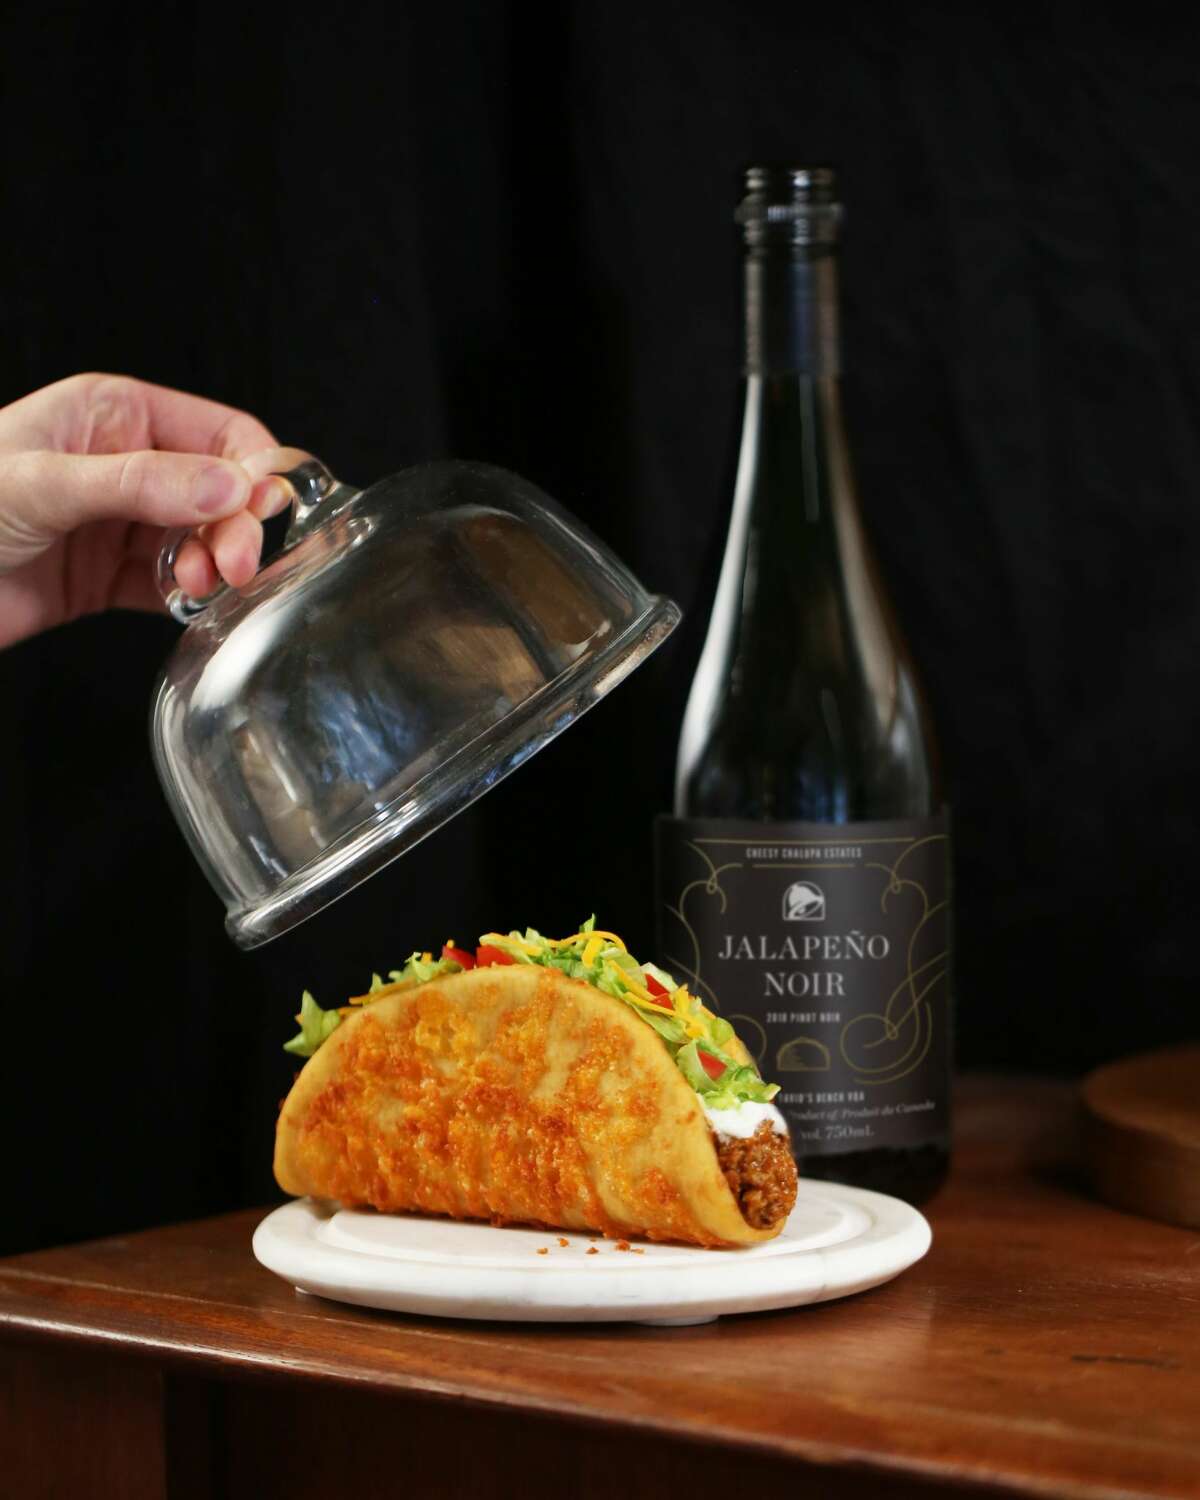 Never say that Taco Bell doesn't think "outside of the box." Just after they took their beloved their Mexican pizza off their menu, now Taco Bell is rolling out its custom Jalapeño Noir wine. Taco Bell Canada Toasted Cheesy Chalupa and JalapeÃ±o Noir (CNW Group/Taco Bell Canada)